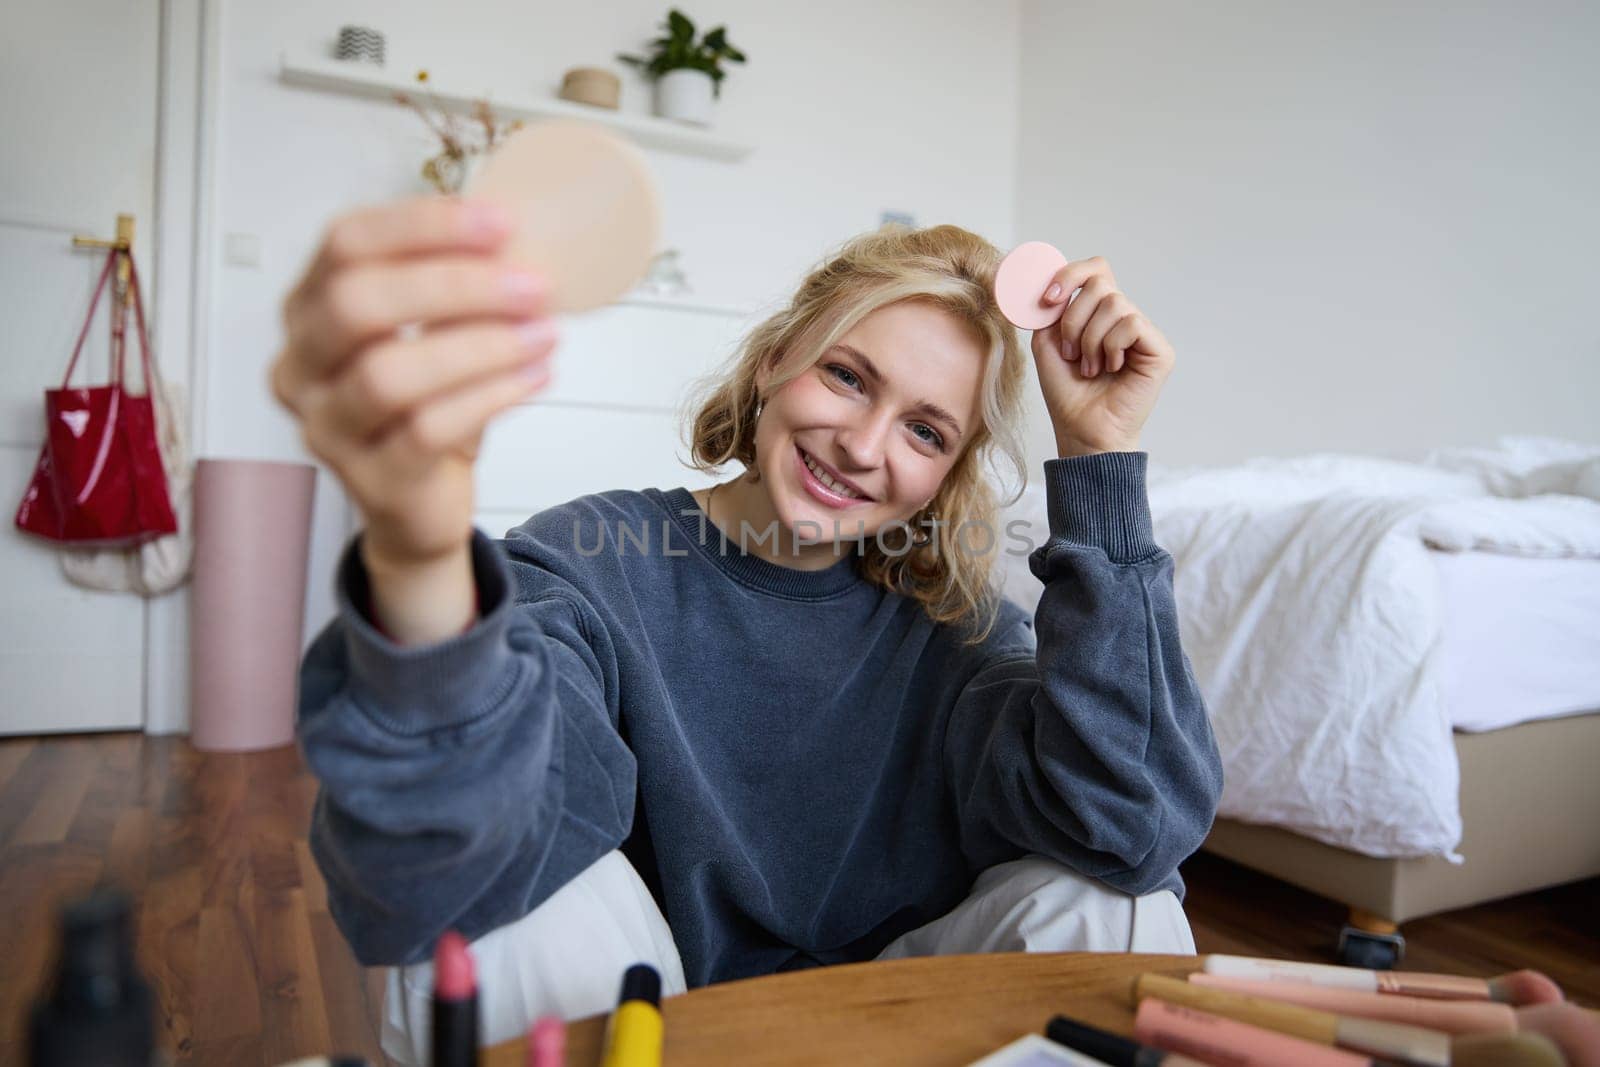 Portrait of young woman, content creator, showing beauty makeup products at camera, sitting on floor in bedroom and smiling.